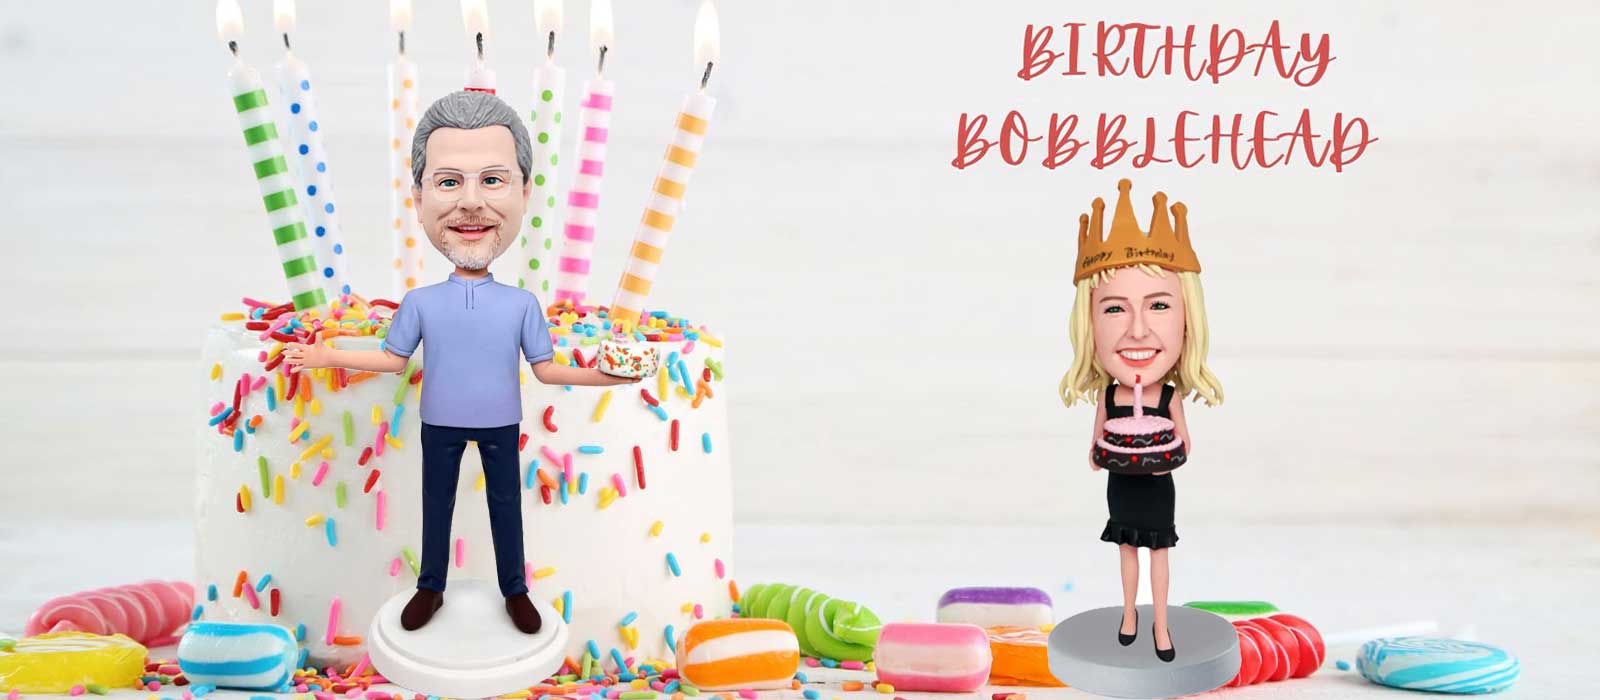 Custom Bobble Heads As Unique Birthday Gifts